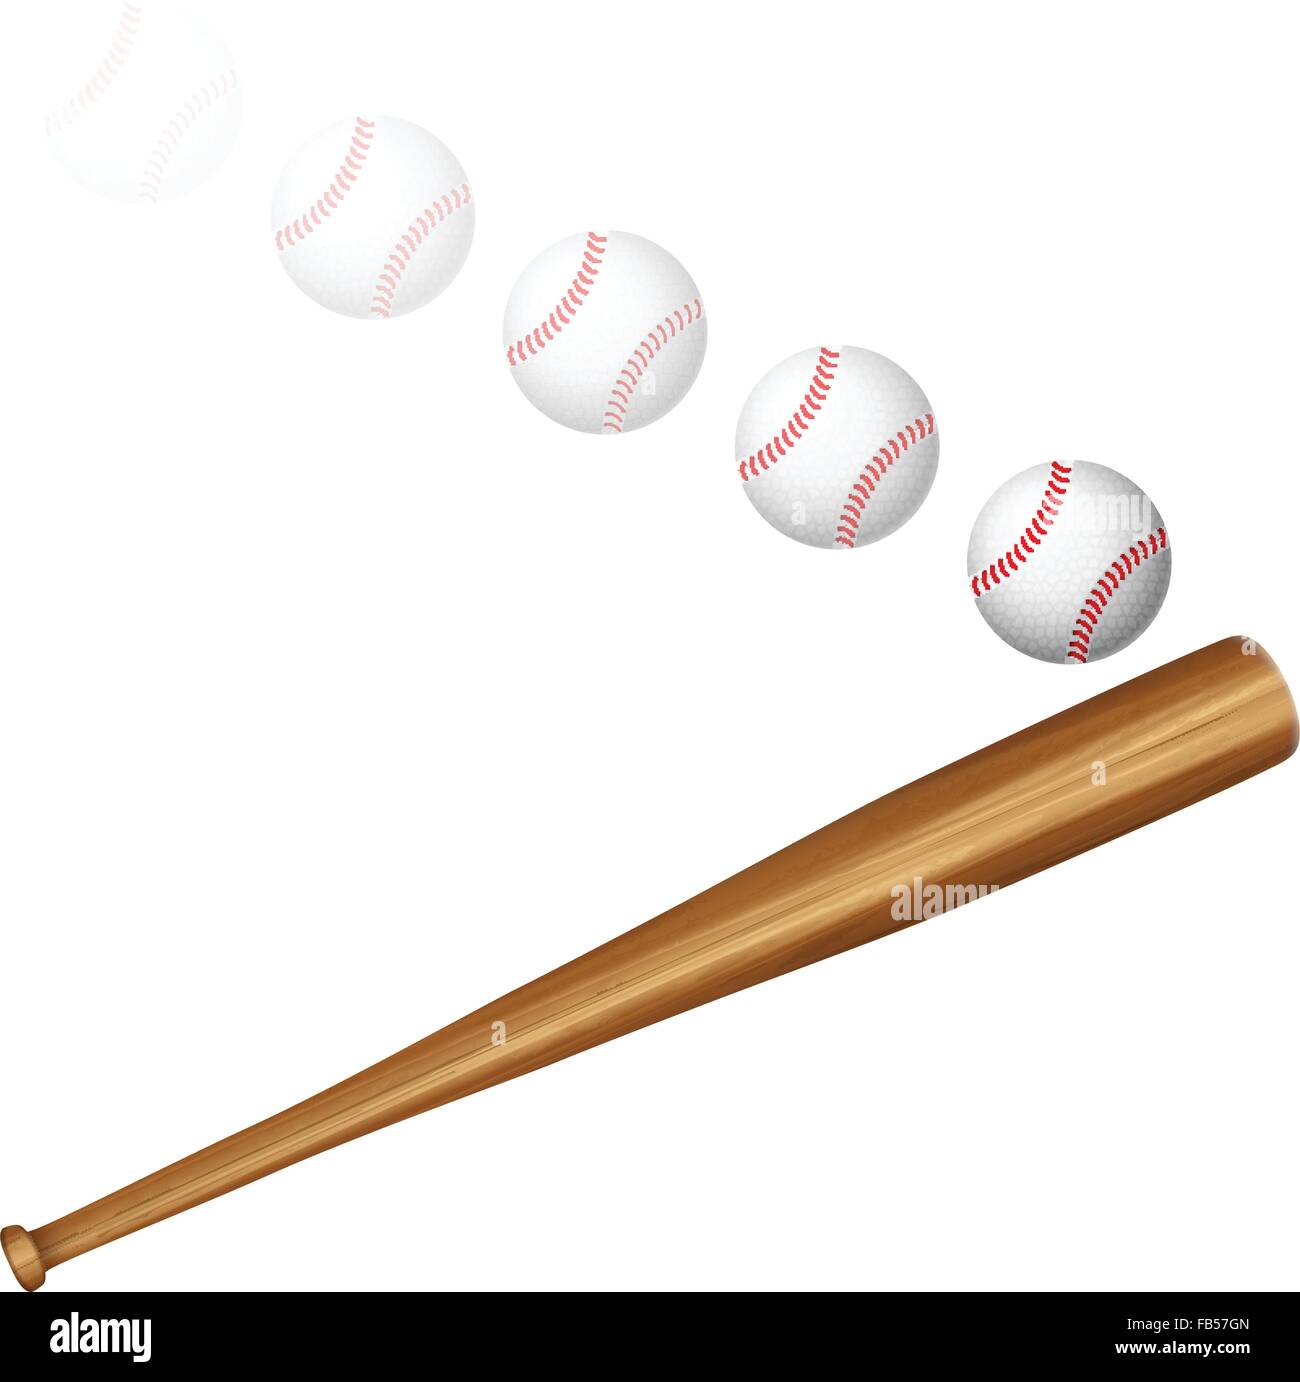 Baseball bat and ball on a white background. Vector illustration. Stock Vector